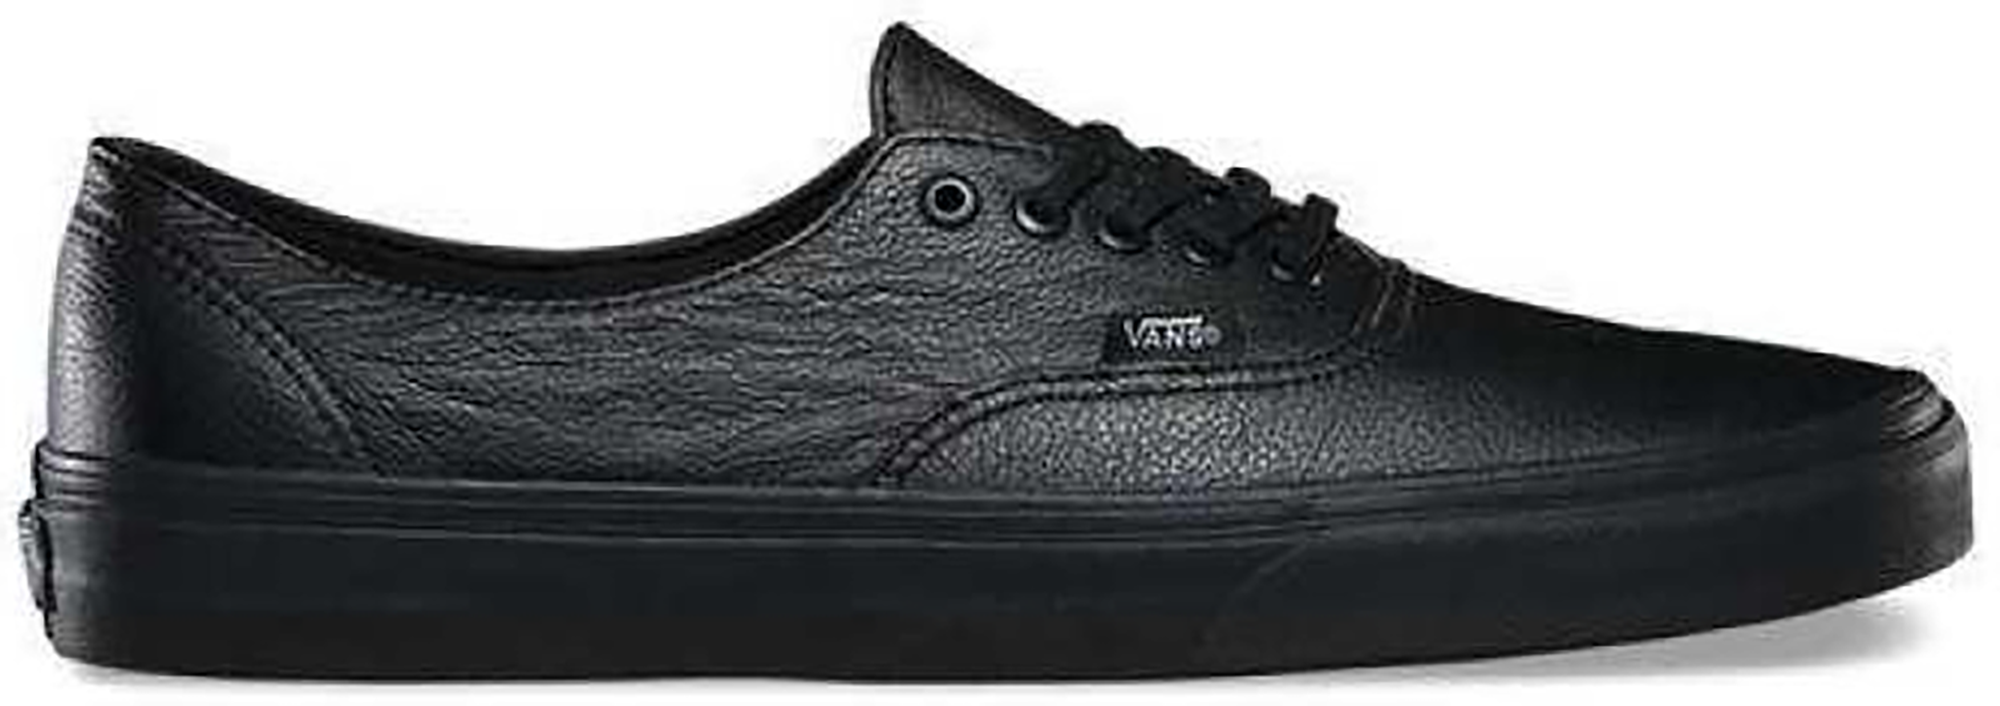 vans leather black and white